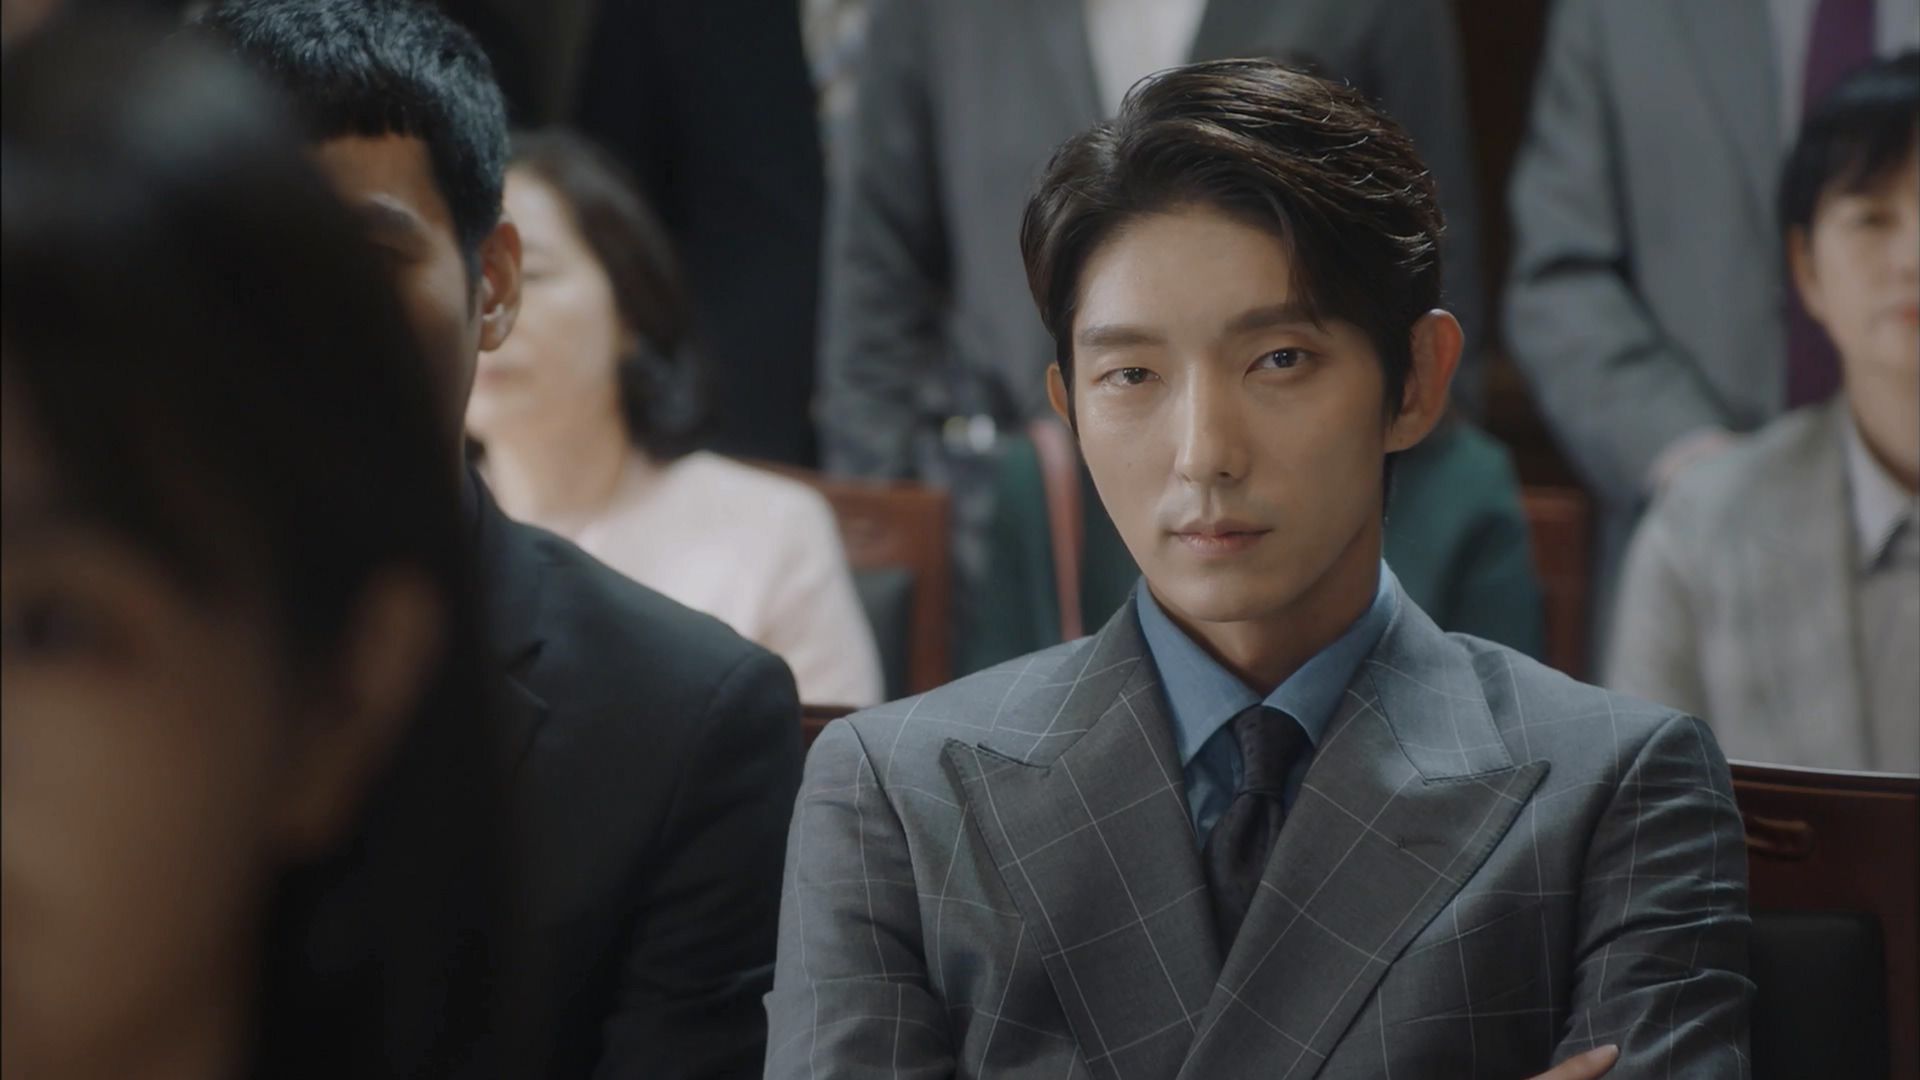 Lawless Lawyer Wallpapers - Wallpaper Cave